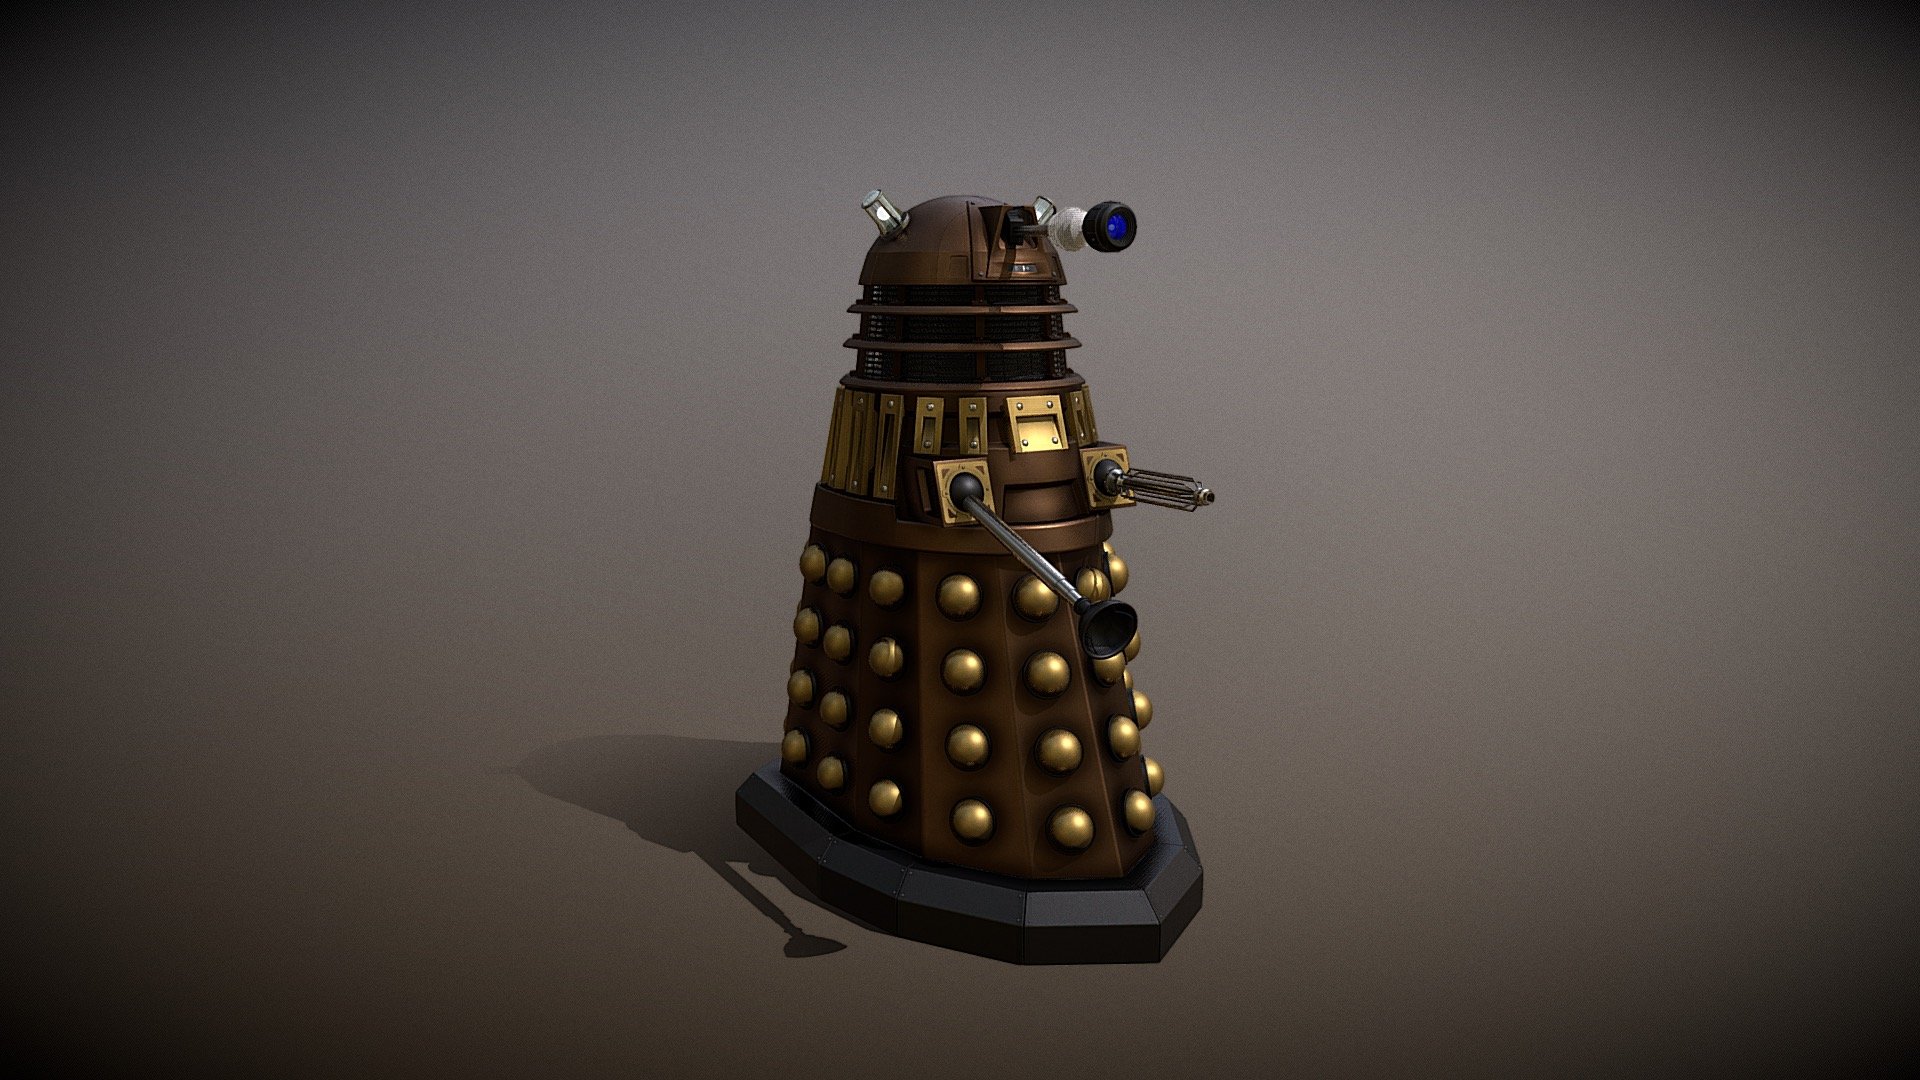 NOT PRESENTED AS GAME READY

Updated new series Dalek.  

I have attempted rigging for the first time!  After many youtube tutorials I have somehow managed to get the head, eye stalk, shoulders, plunger arm and gun to be positionable.  

Hope you all like it.

I may update the rest of the daleks over time 3d model